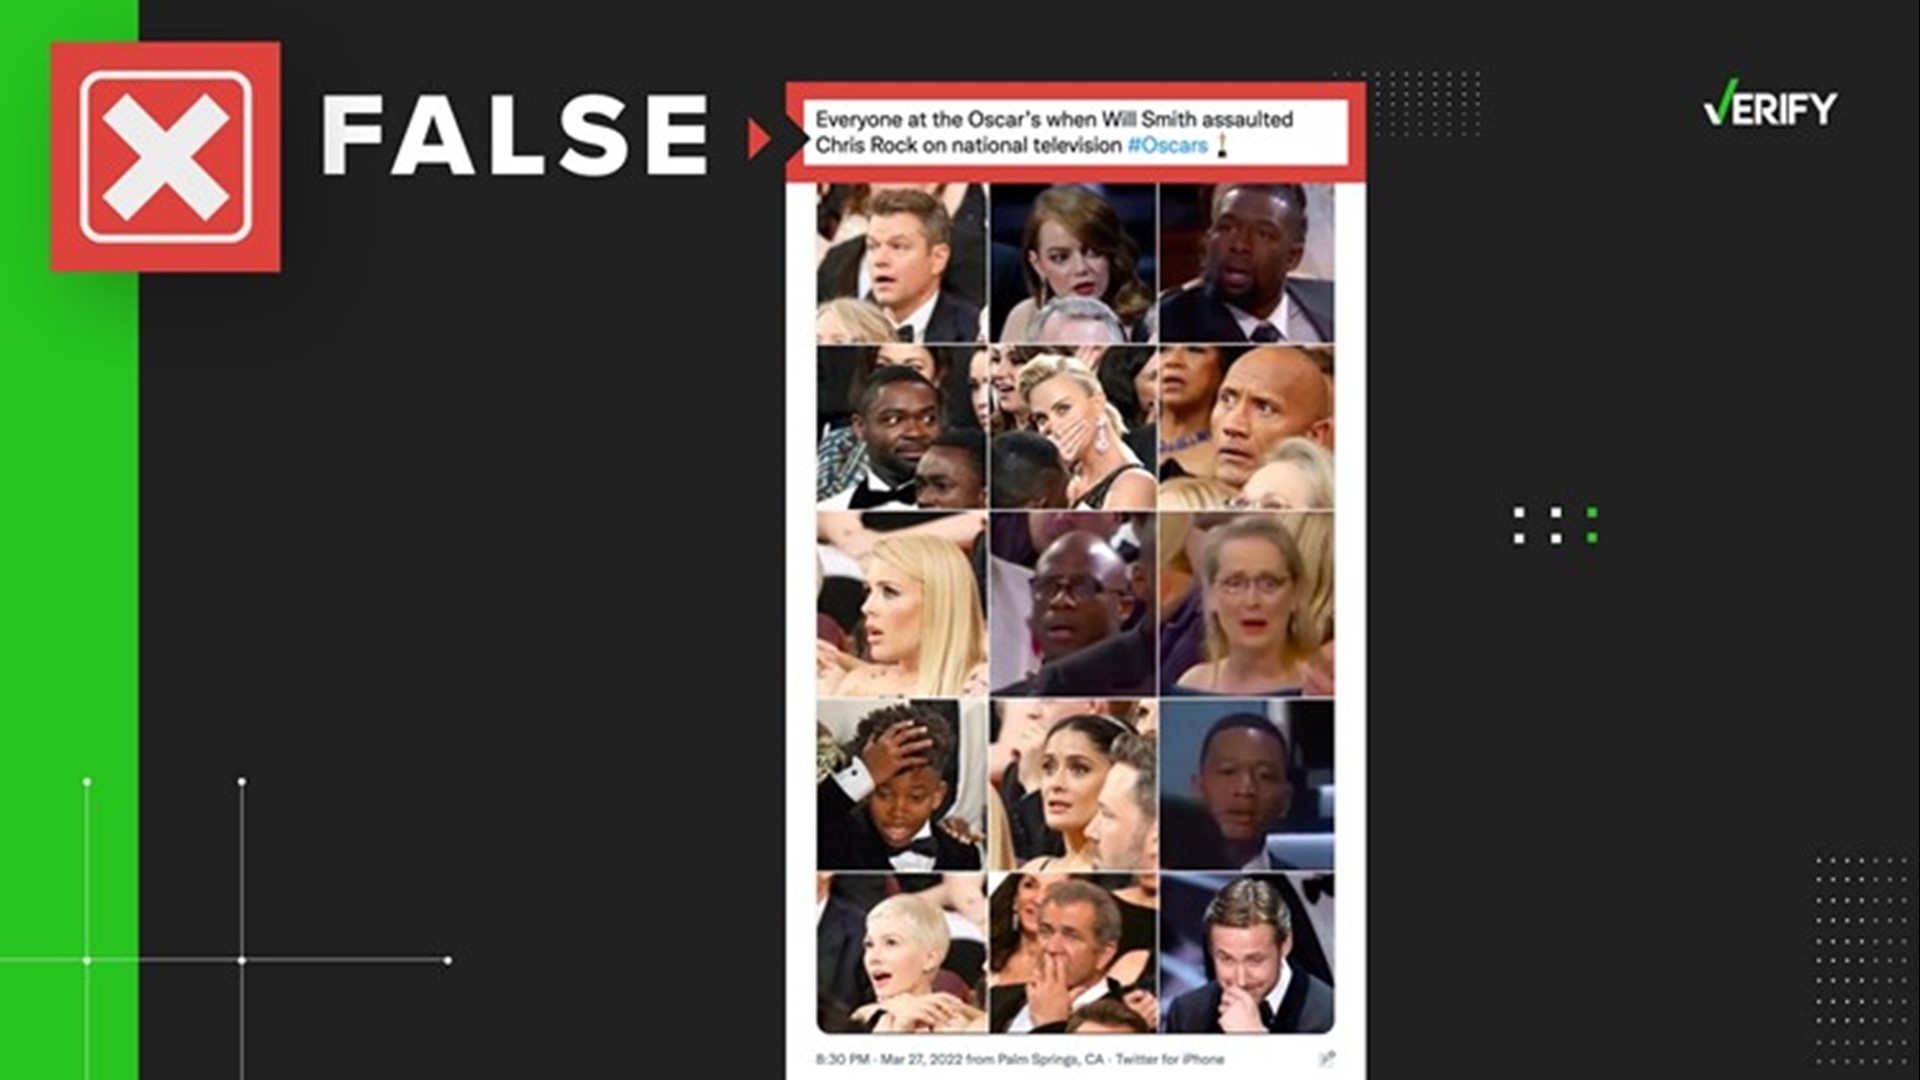 A viral meme claiming to show celebrity reactions after Will Smith hit Chris Rock at the Oscars is not from 2022. It’s actually a compilation of photos from 2017.